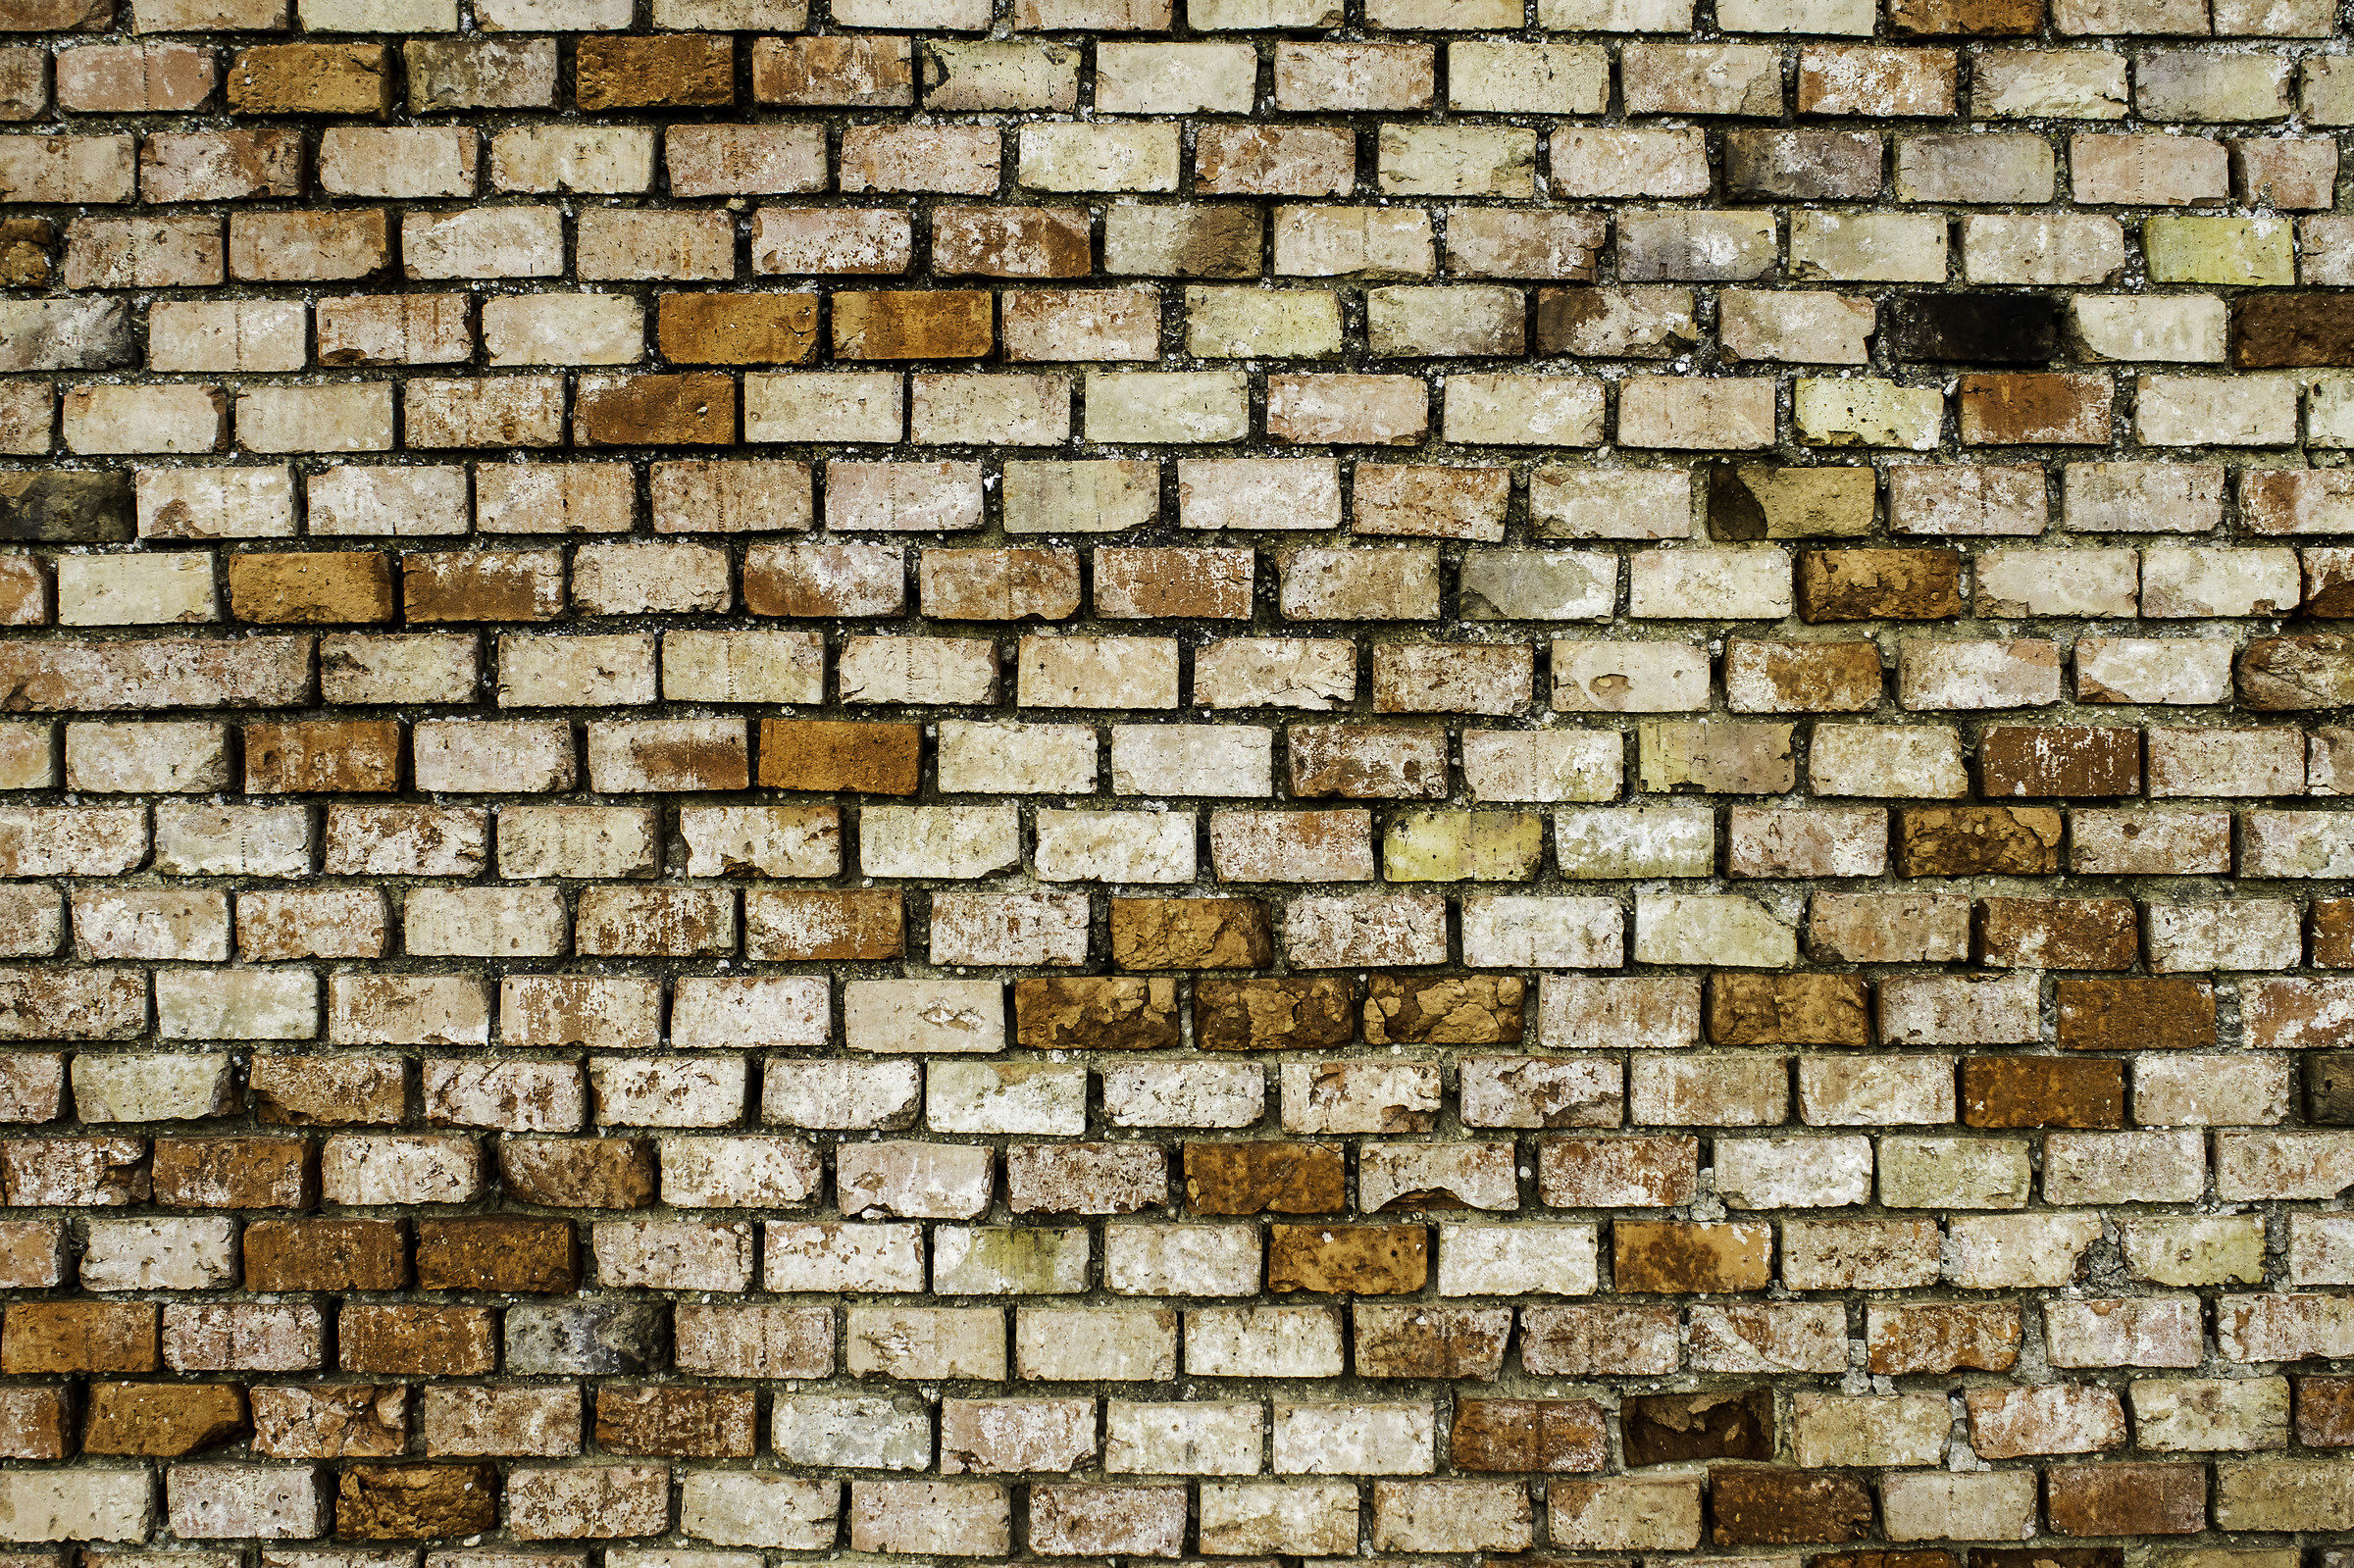 Just another brick in the Wall...